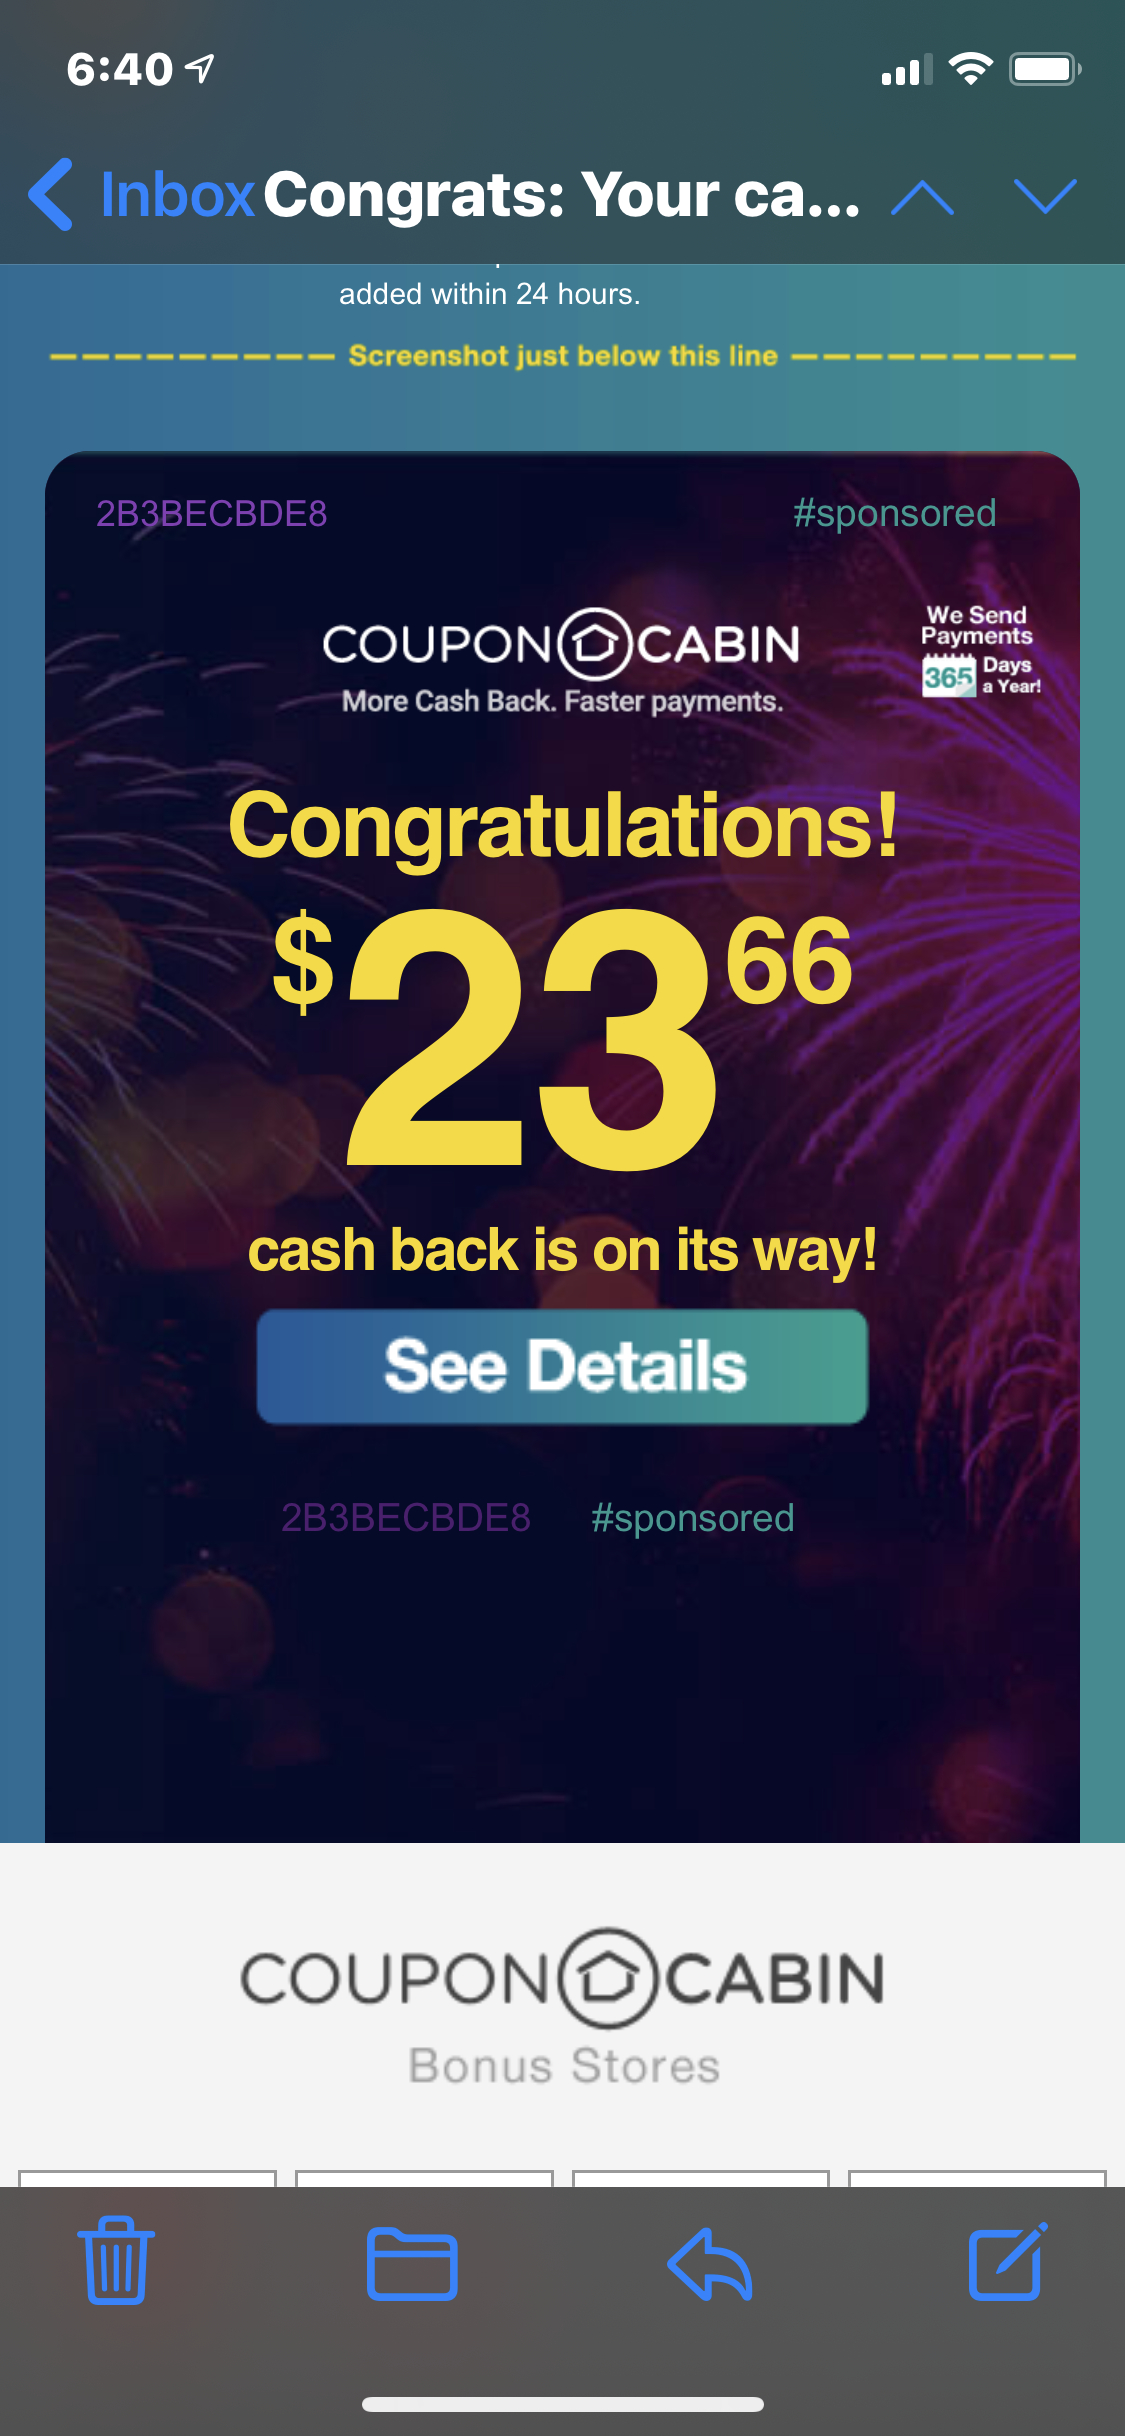 couponcabin referral